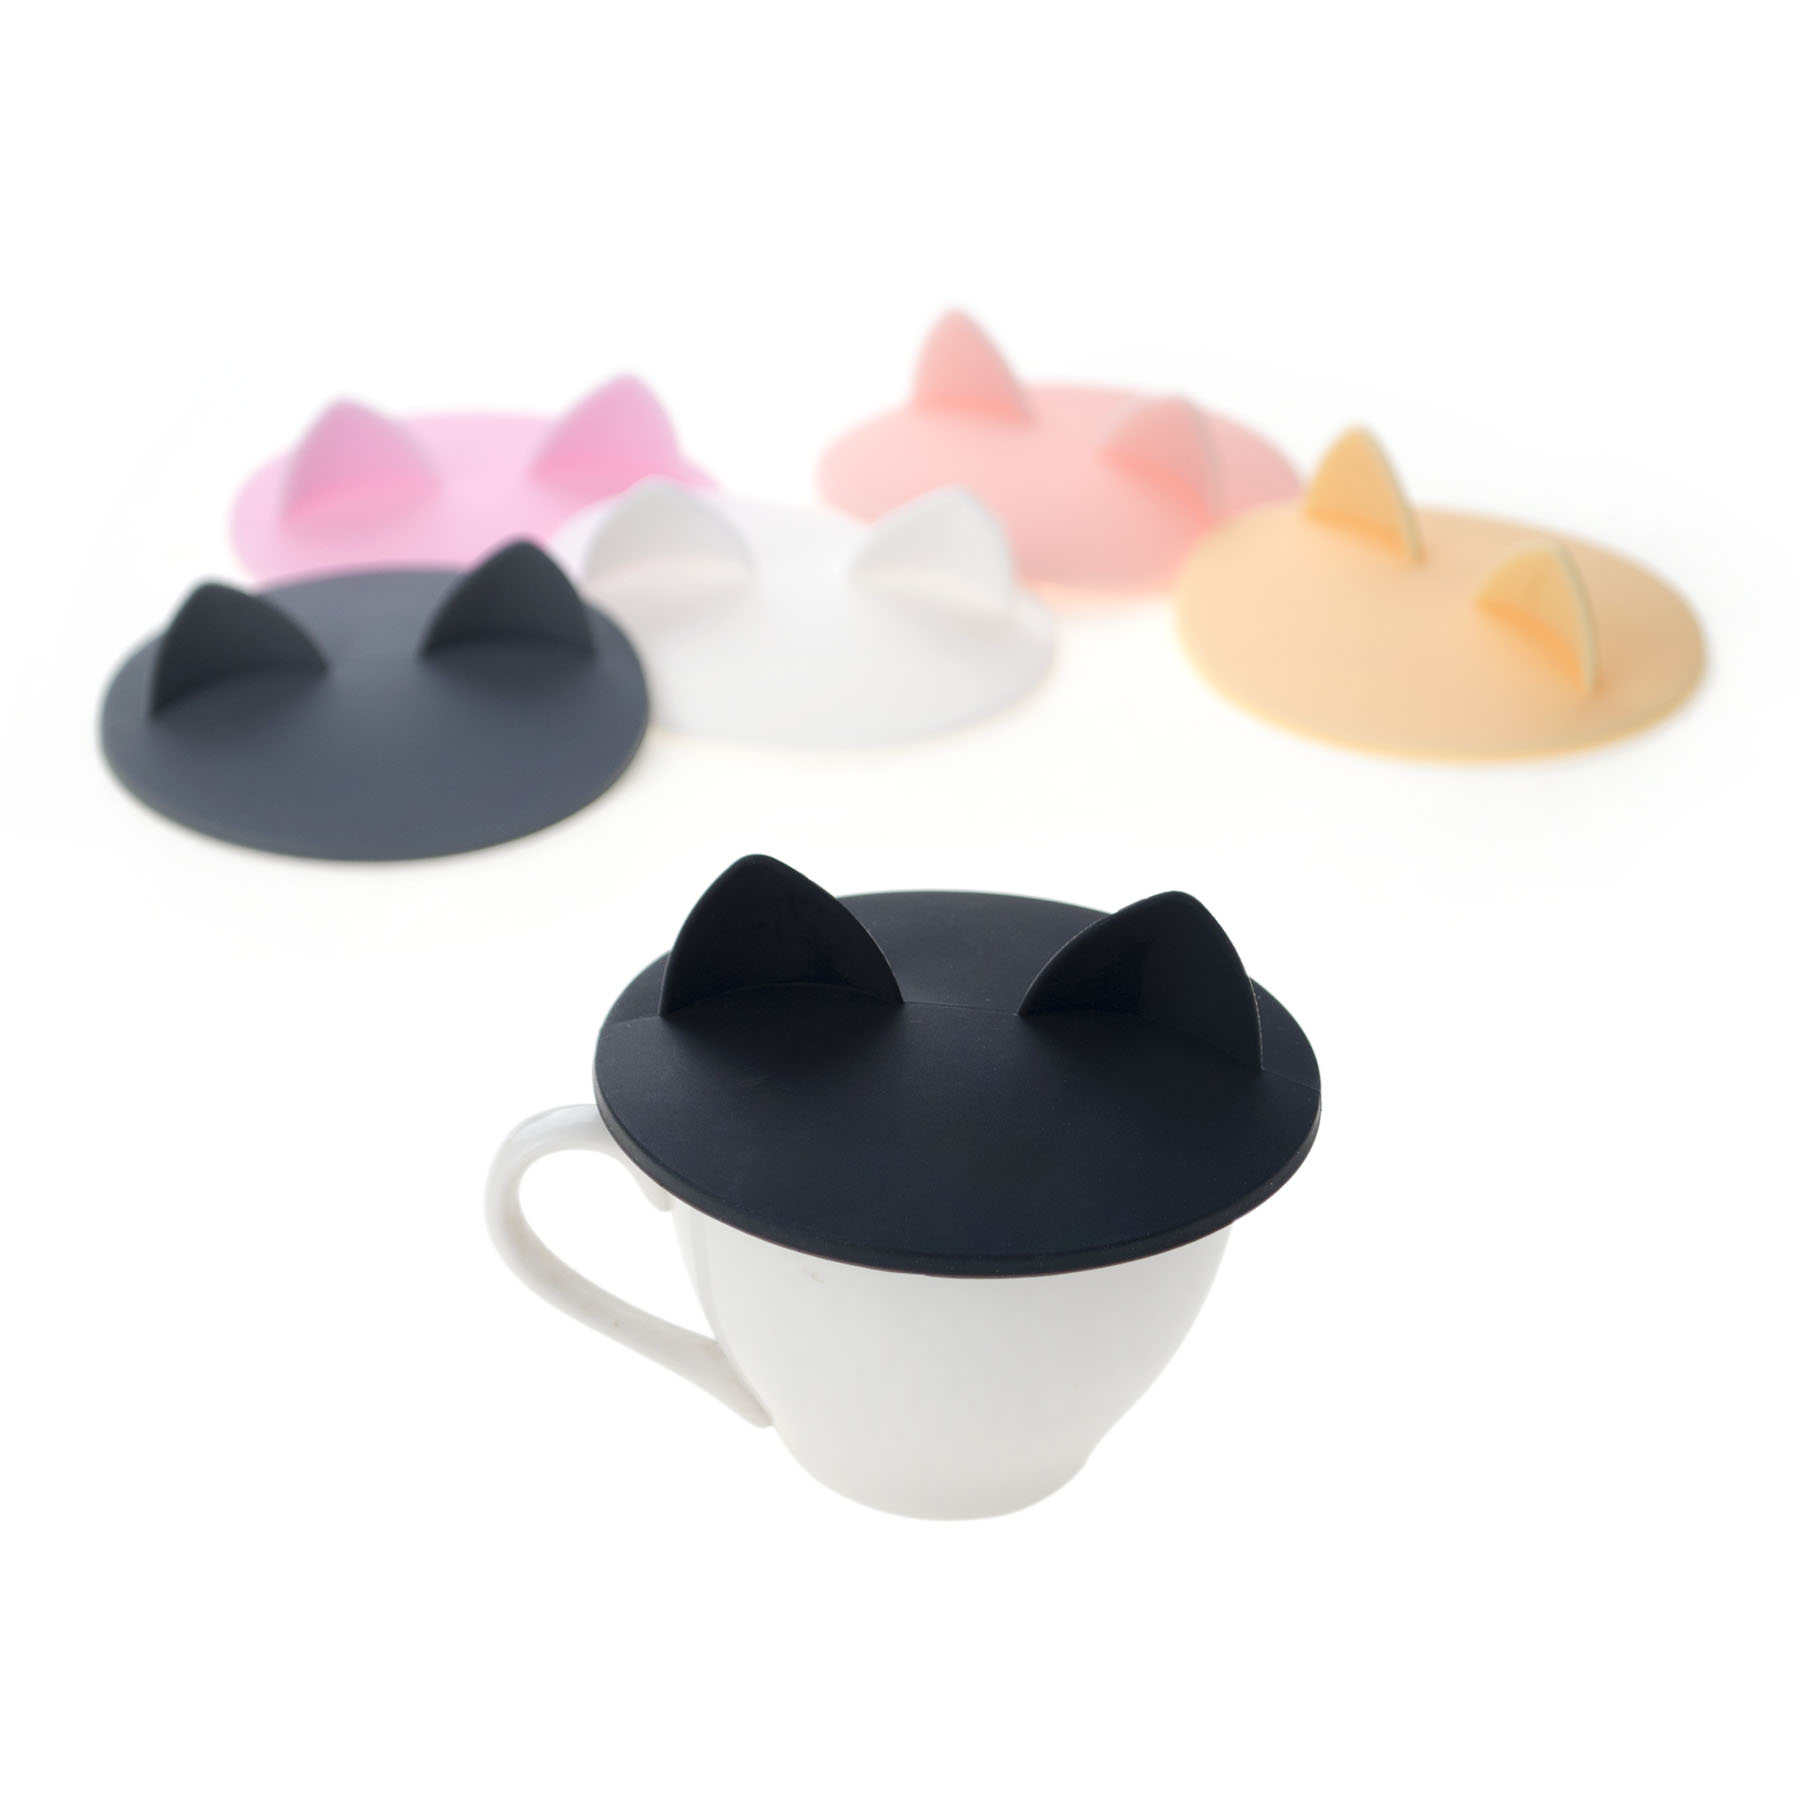 Aspire 12 PCS Silicone Cup Food Grade Lids Mug Cover Anti-dust Airtight Seal Drink Cup Lids